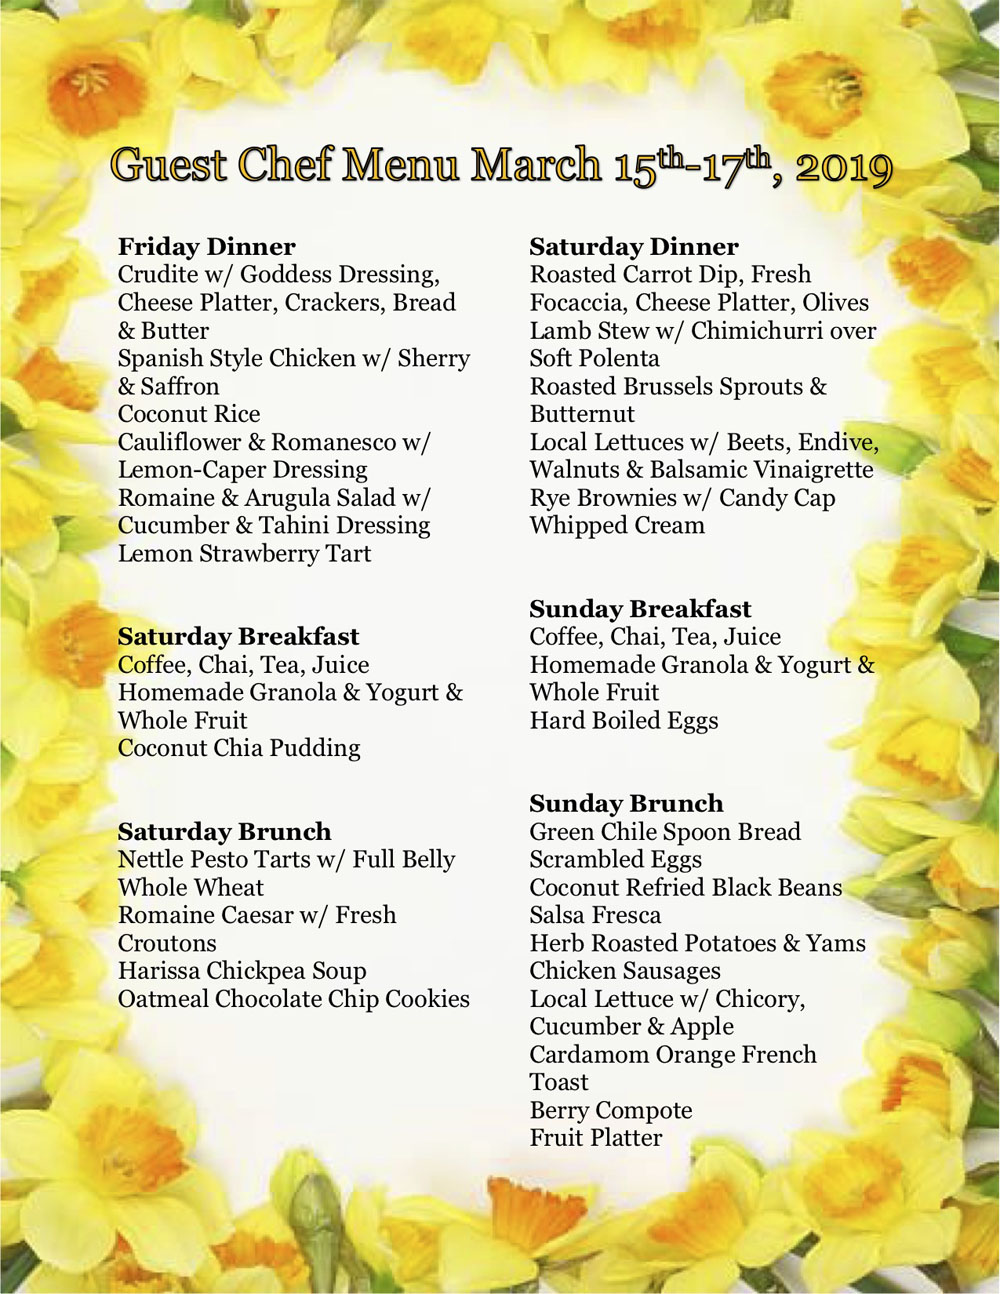 Don’t Miss the Upcoming Guest Chef Weekend